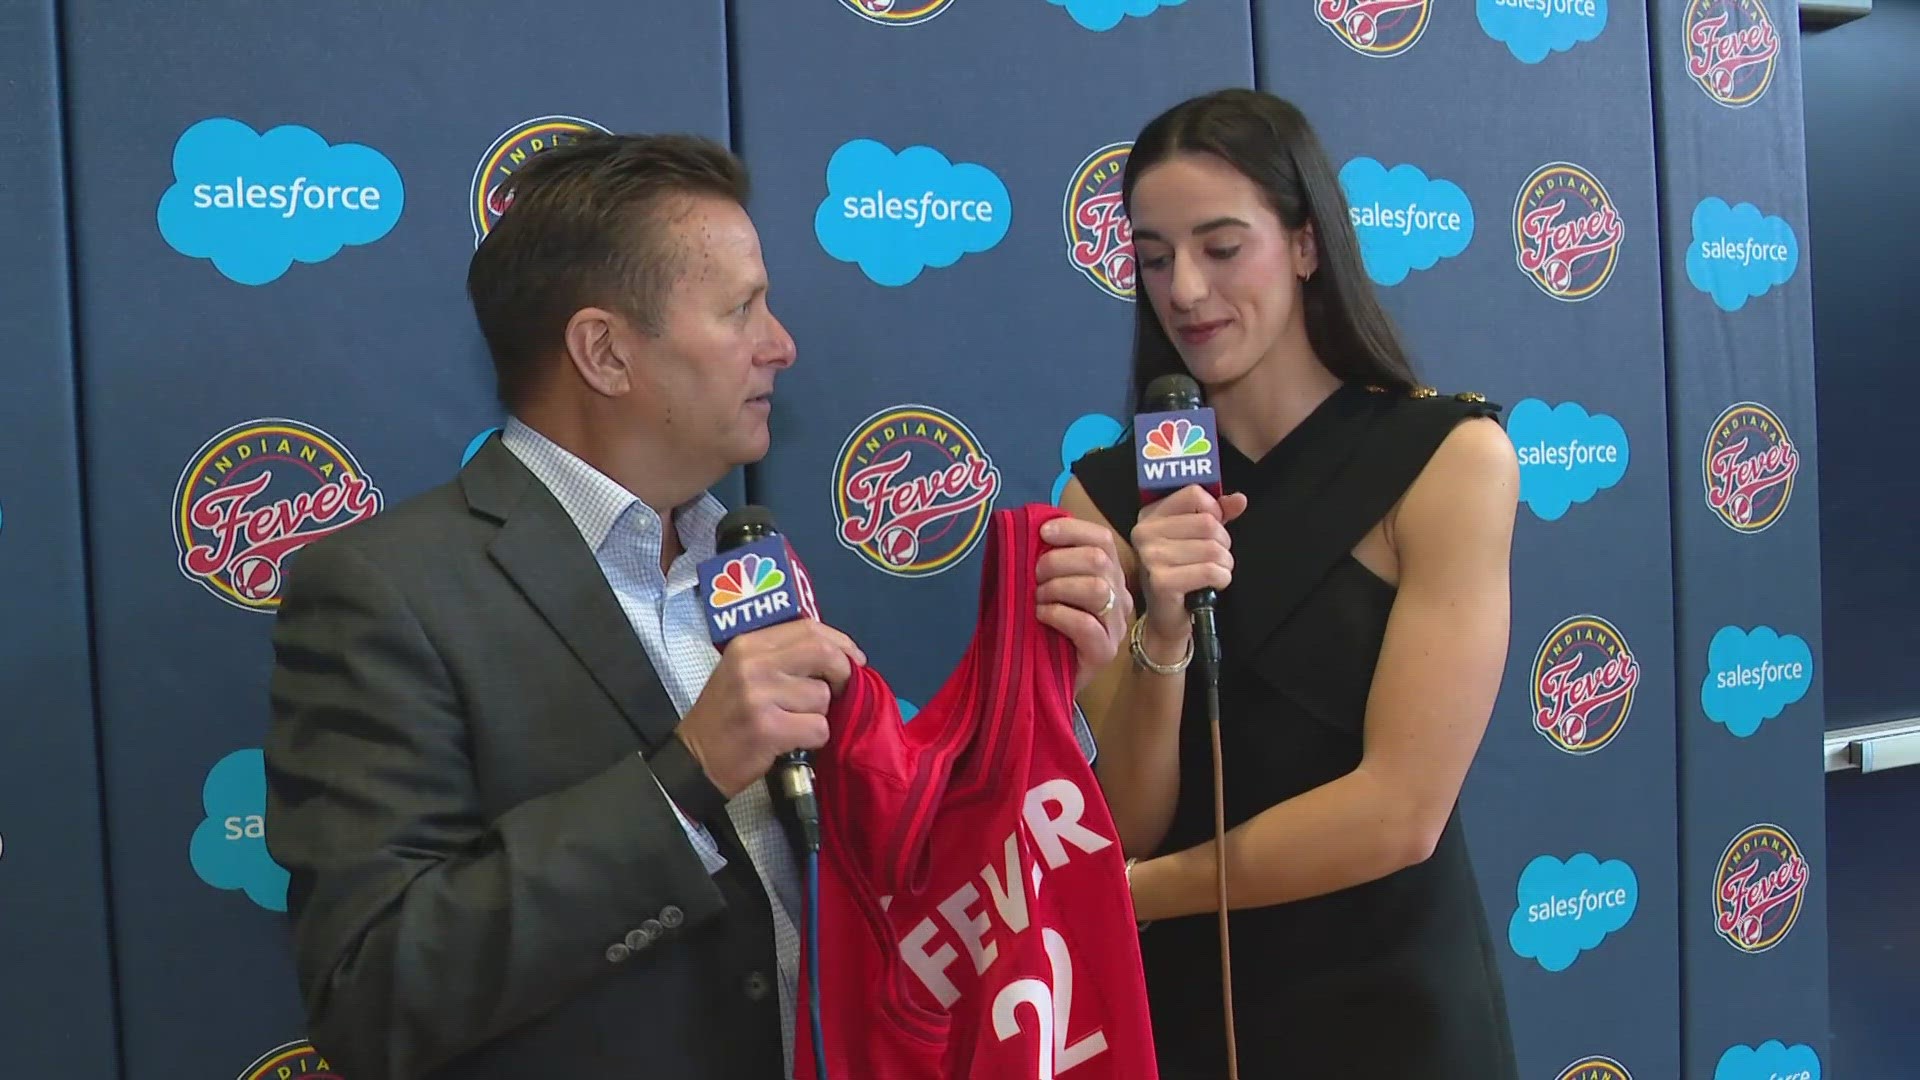 13Sports director Dave Calabro talks with the Indiana Fever's newest player, Caitlin Clark.